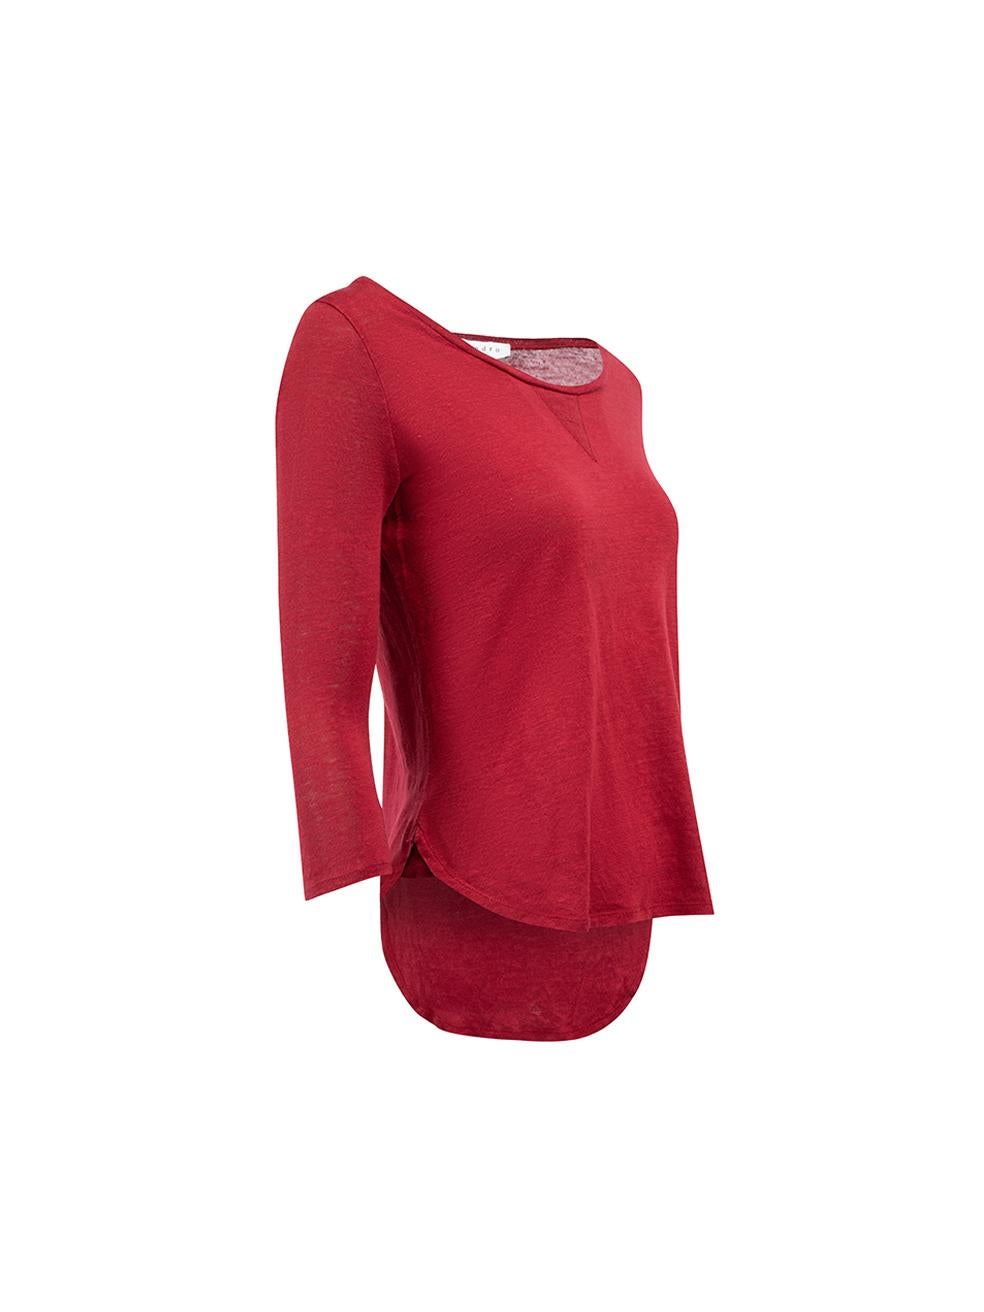 CONDITION is Very good. Hardly any visible wear to top is evident on this used Sandro designer resale item.
 
 Details
 Red
 Linen
 Knitted top
 Round neckline
 3/4 Length sleeves
 High-low hem
 
 
 Made in Portugal
 
 Composition
 100% Linen
 
